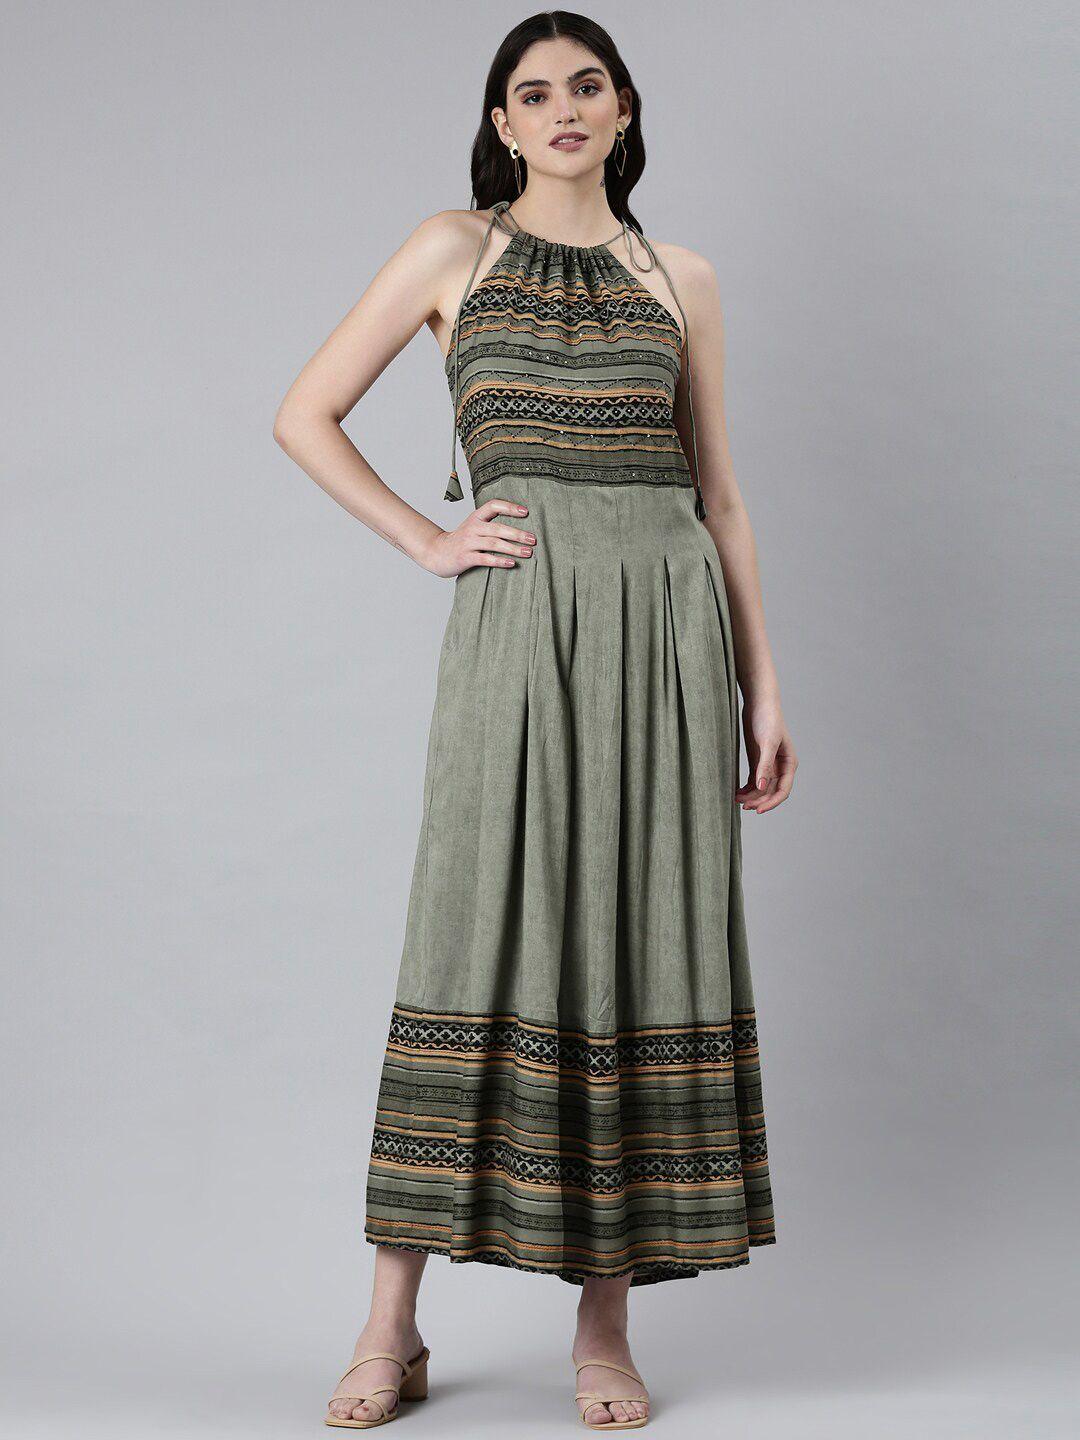 showoff-tribal-printed-halter-neck-pleated-cotton-a-line-dress